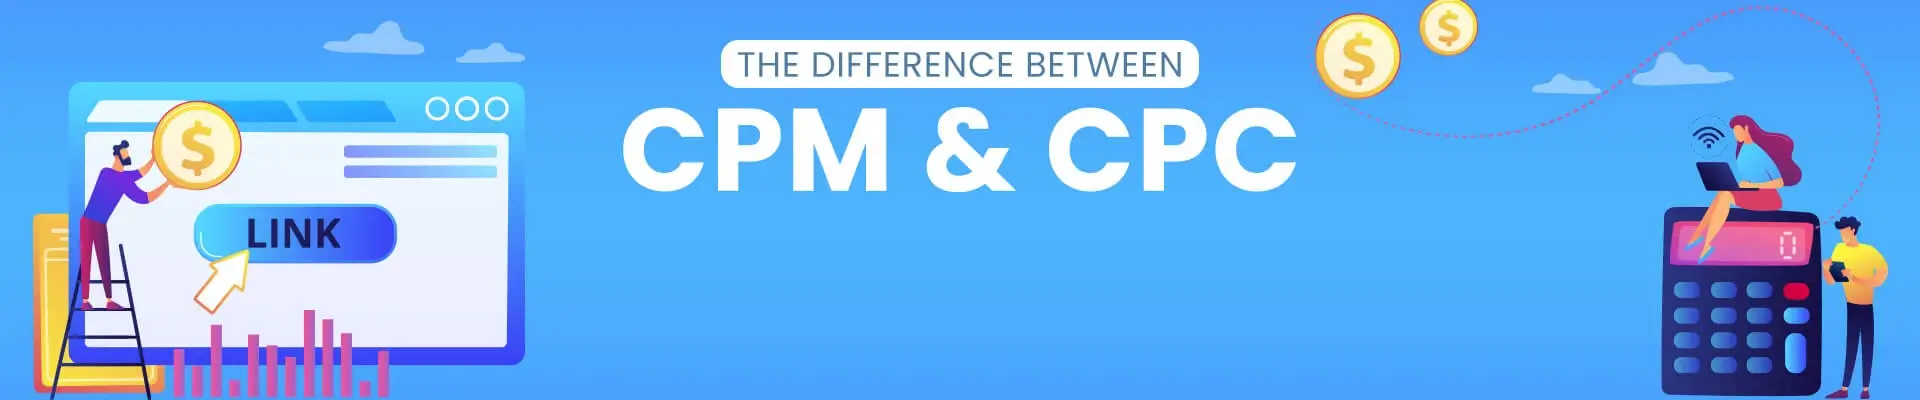 CPM vs CPC: What's The Difference? [2021]